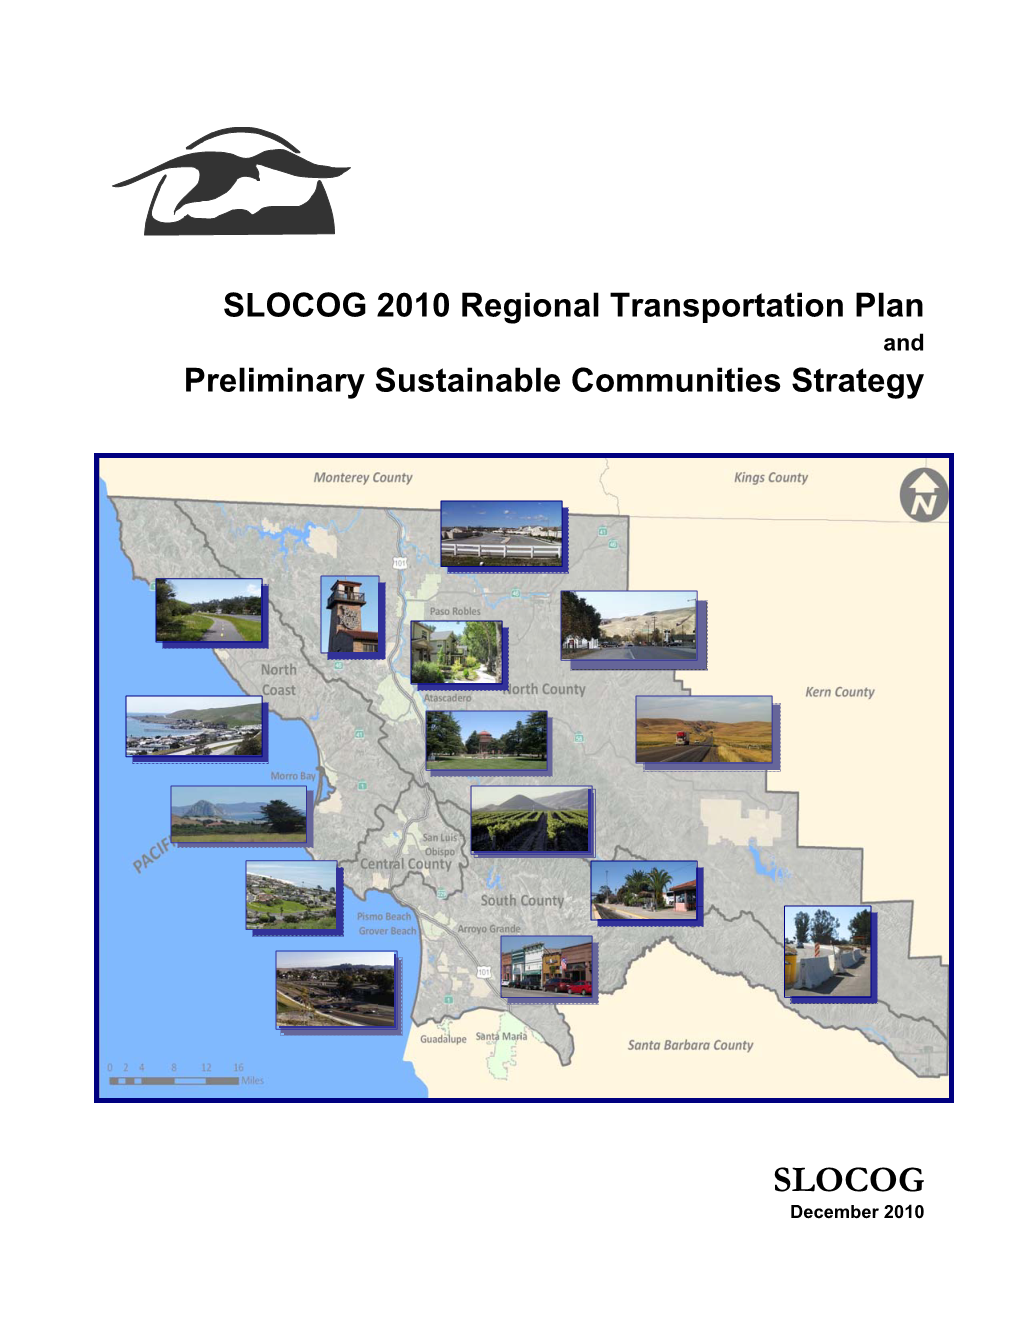 SLOCOG 2010 Regional Transportation Plan and Preliminary Sustainable Communities Strategy